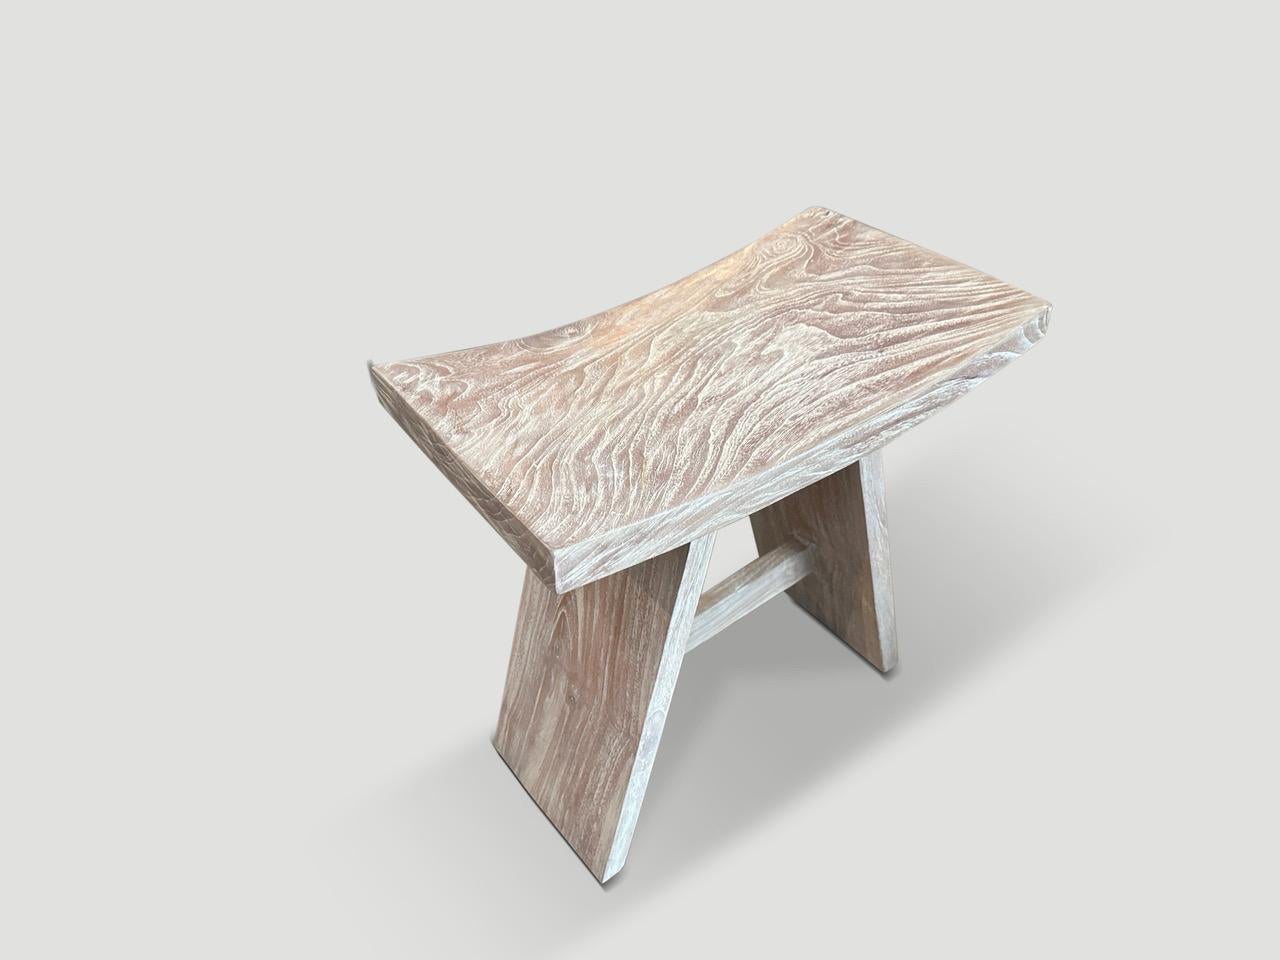 Sleek minimalist bench or stool hand made from a single slab of reclaimed teak with a cerused finish revealing the beautiful wood grain. We have a collection. The images reflect the one shown.

The St. Barts Collection features an exciting line of